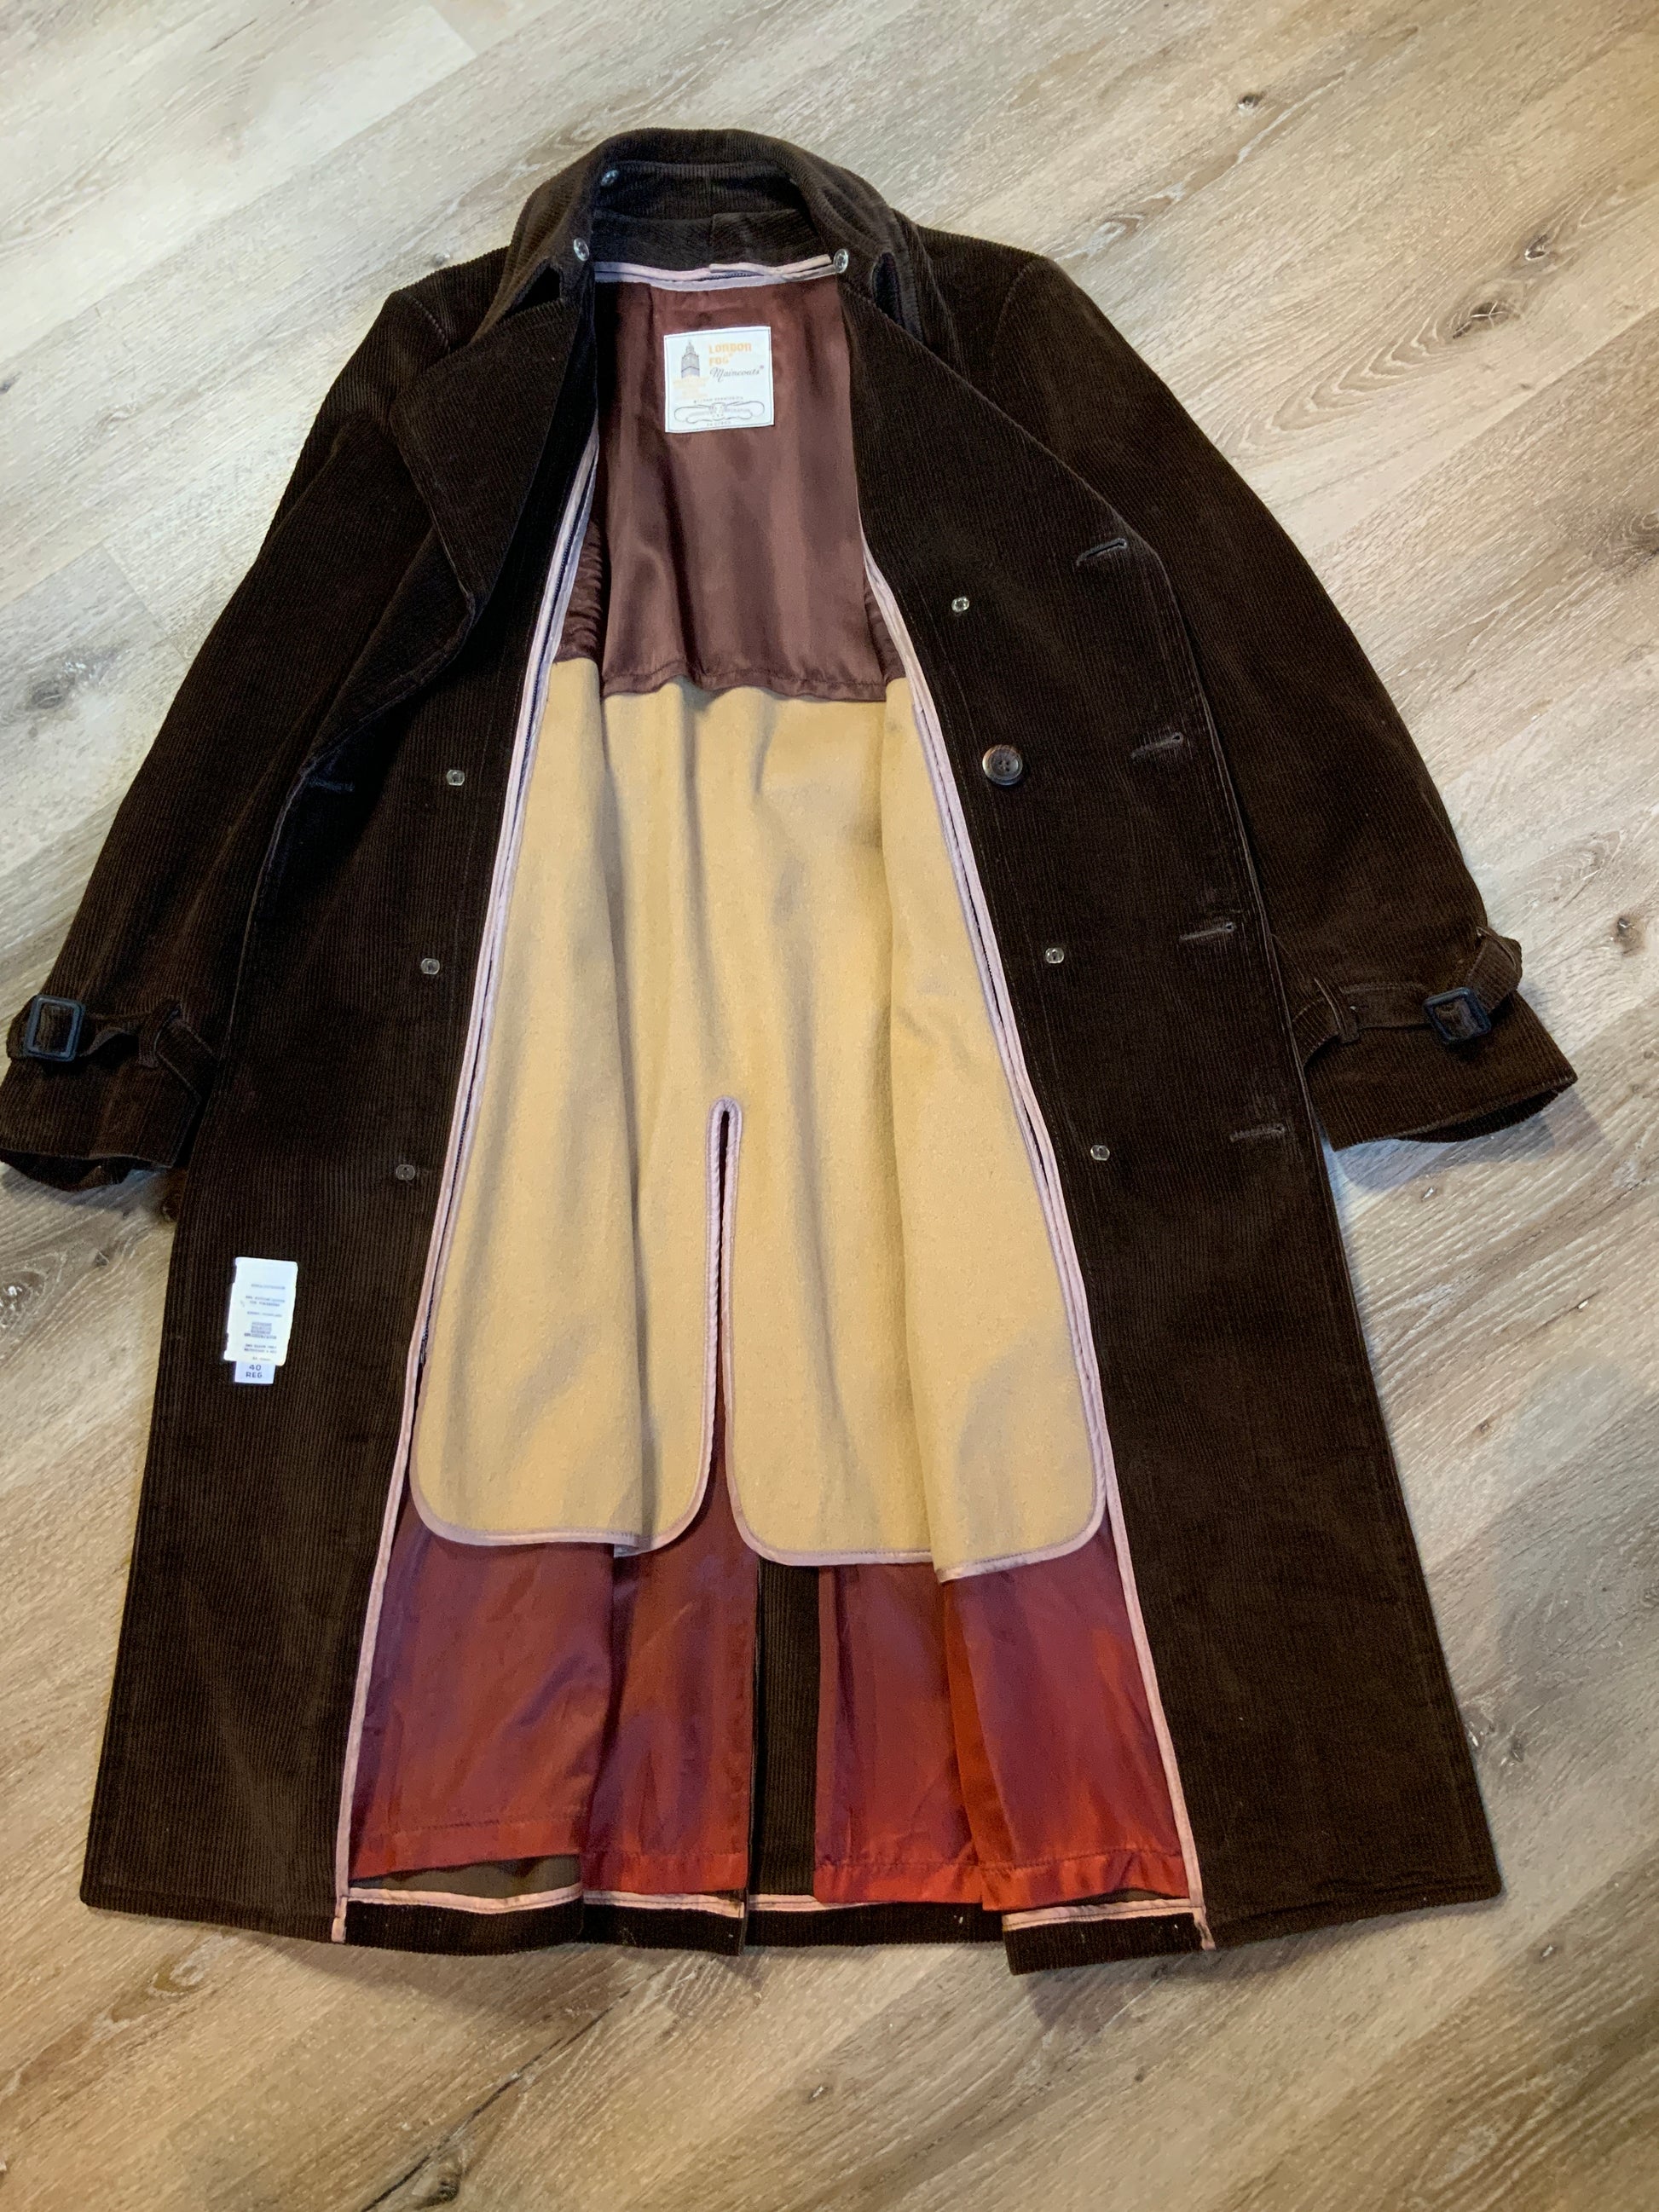 Kingspier Vintage - London Fog brown corduroy double breasted trench coat with wooden buttons, slash pockets, two belt options and zip out wool lining.